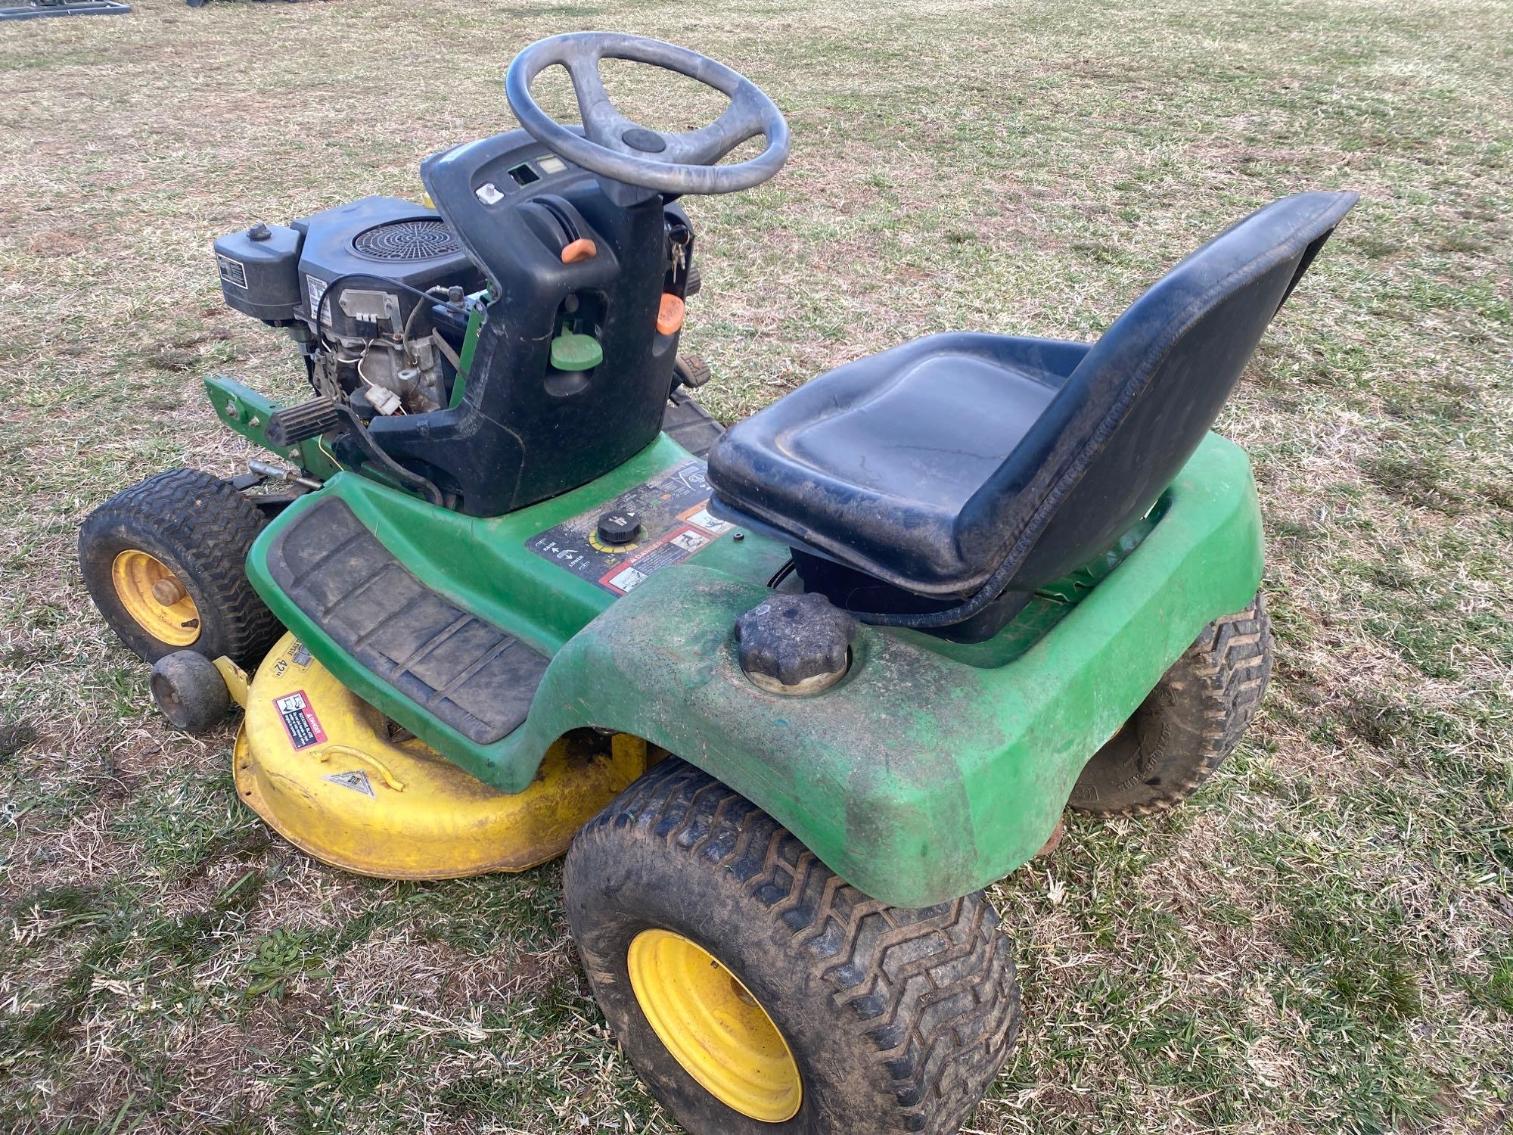 Image for John Deere Lawn Tractor, Model 160- Does not run